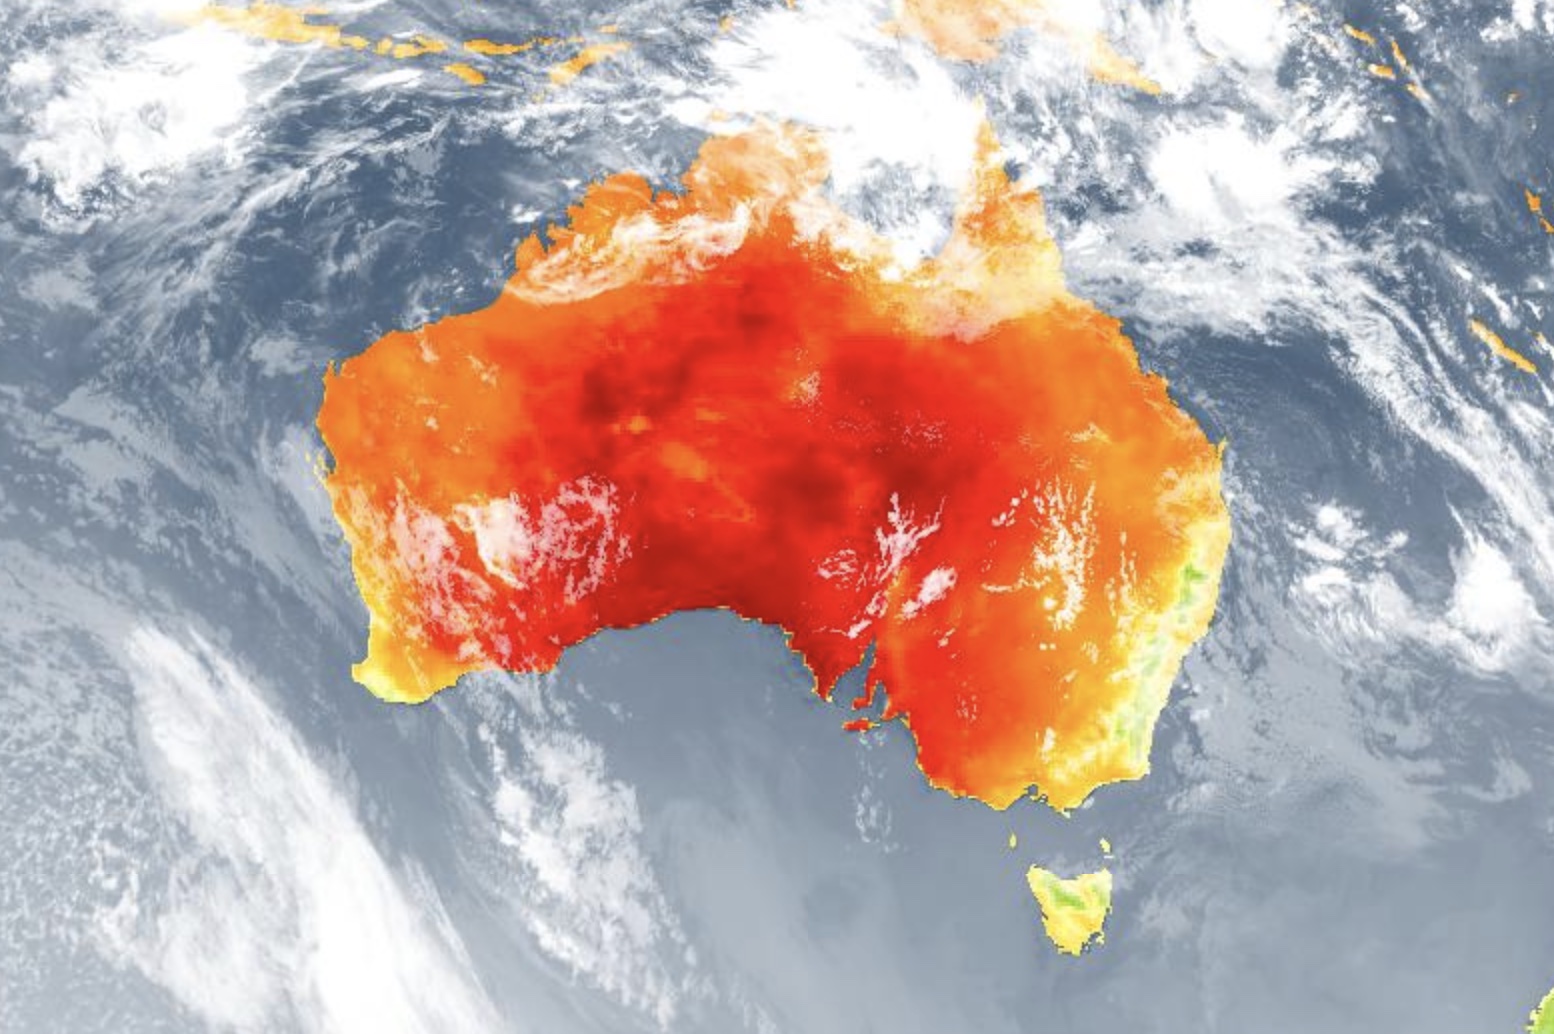 South Australia starting to sizzle